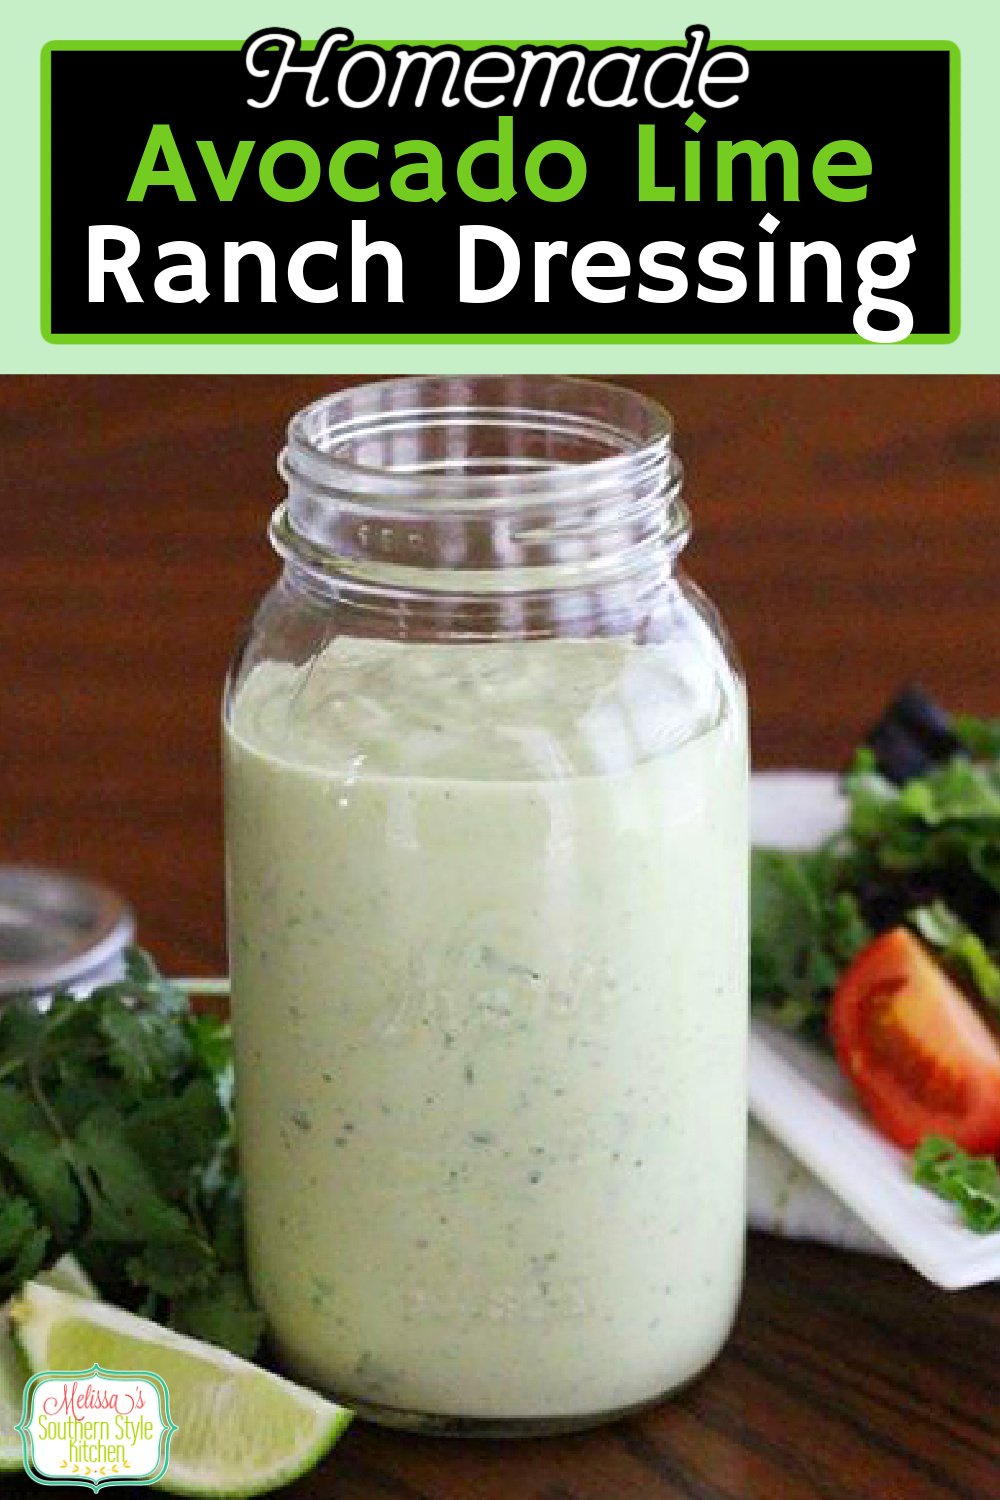 This better-than-Chick-fil-A Avocado Lime Ranch Dressing is addictive! #ranchdressing #avocadoranch #homeadesaladdressing #salads #food #recipes #copycat #southernrecipes #southernfood #melissassouthernstylekitchen #healthyfood #saladdressingrecipes #avocado via @melissasssk